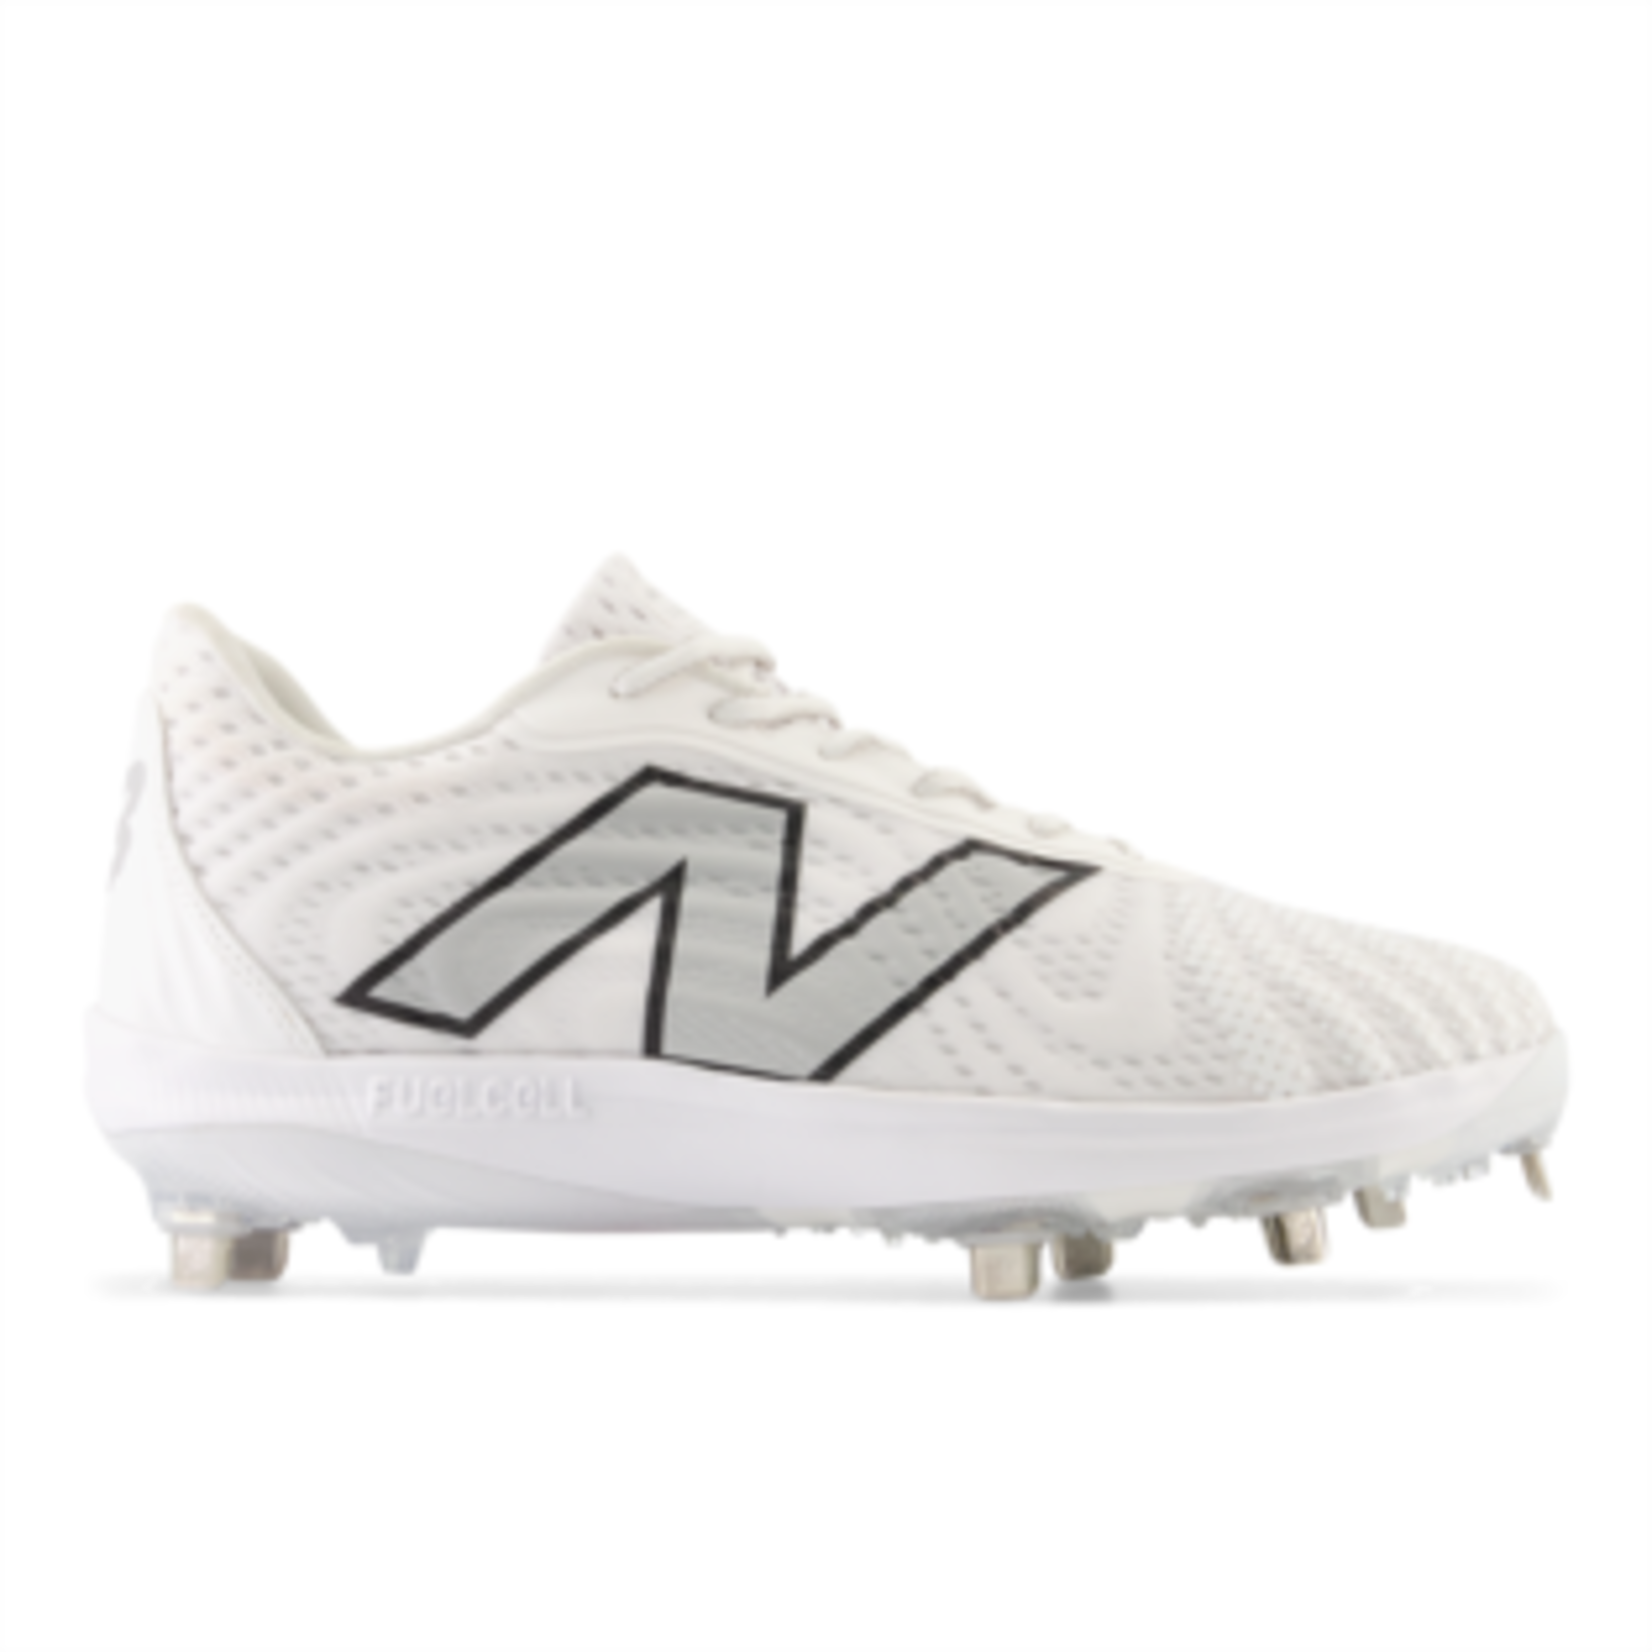 New Balance New Balance Baseball Shoes, FuelCell 4040 v7, Steel Cleat, Mens